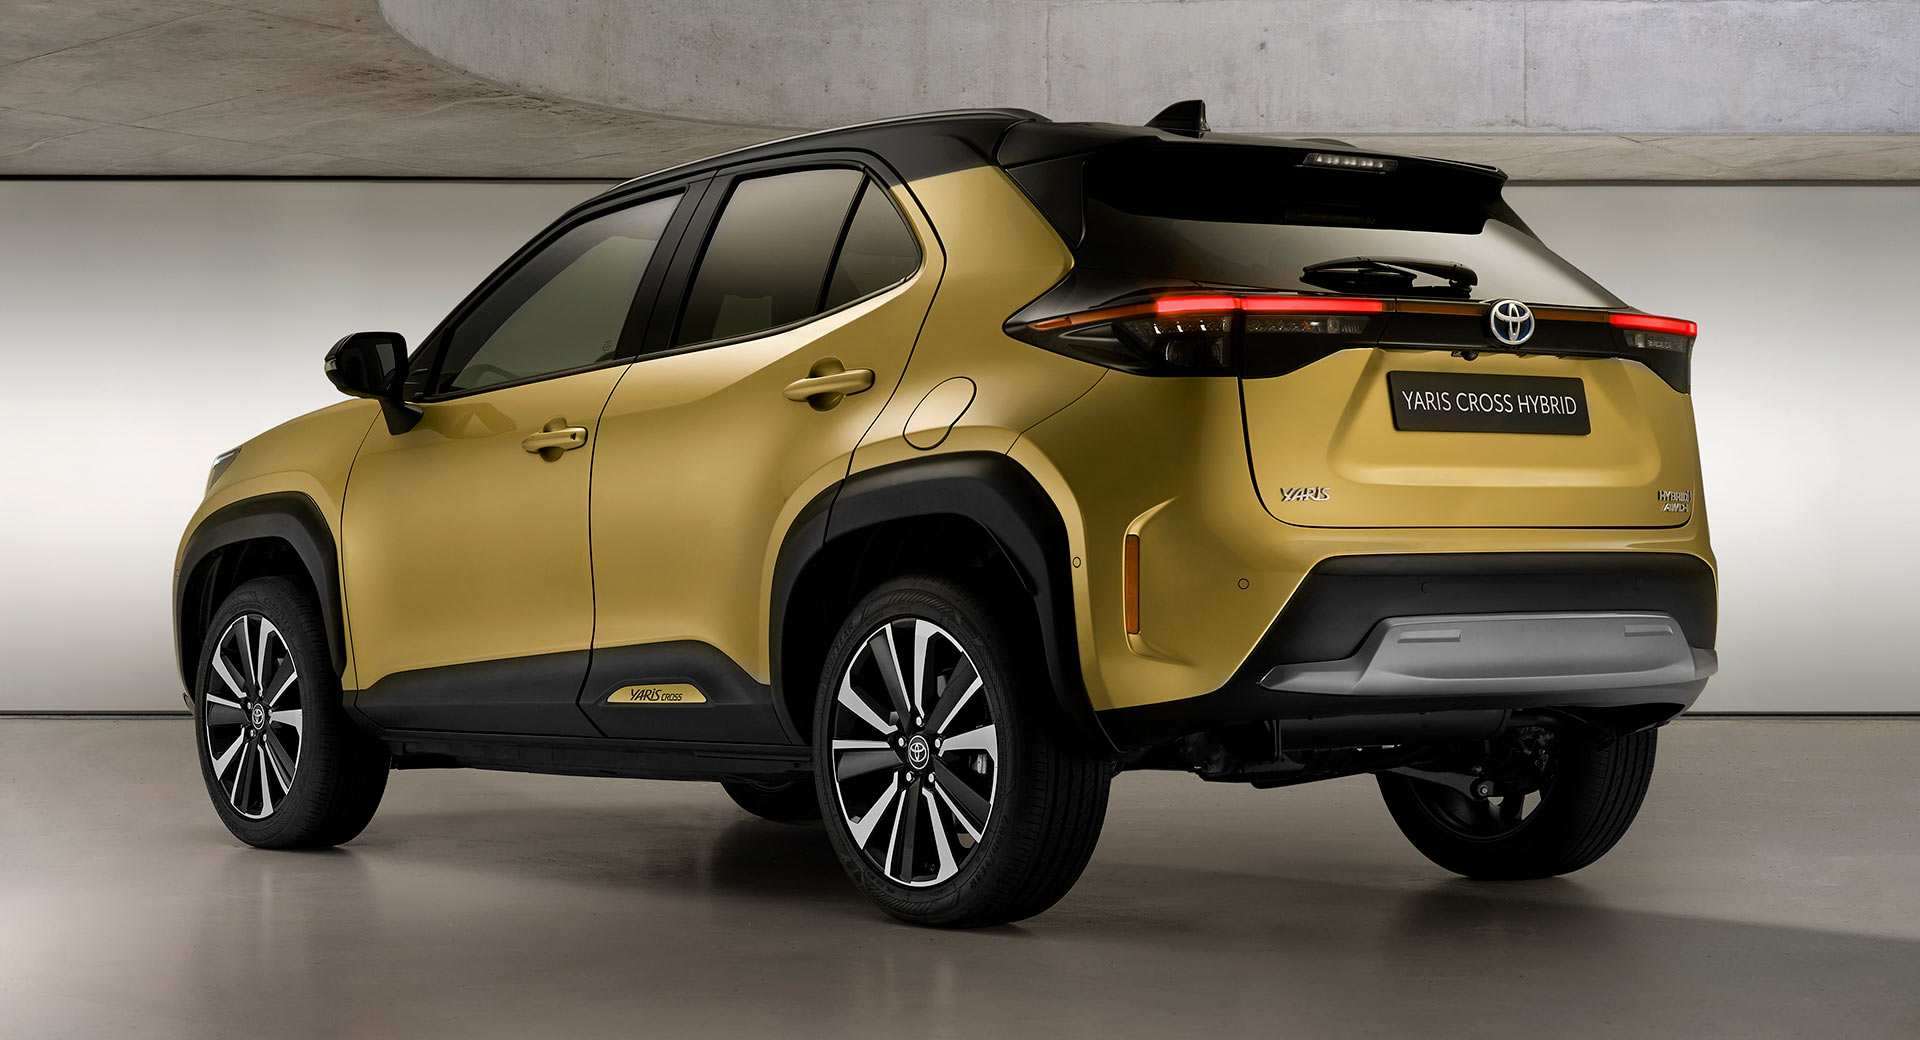 New 2021 Toyota Yaris Cross Adventure Has A Touch of Rugged Appeal ...